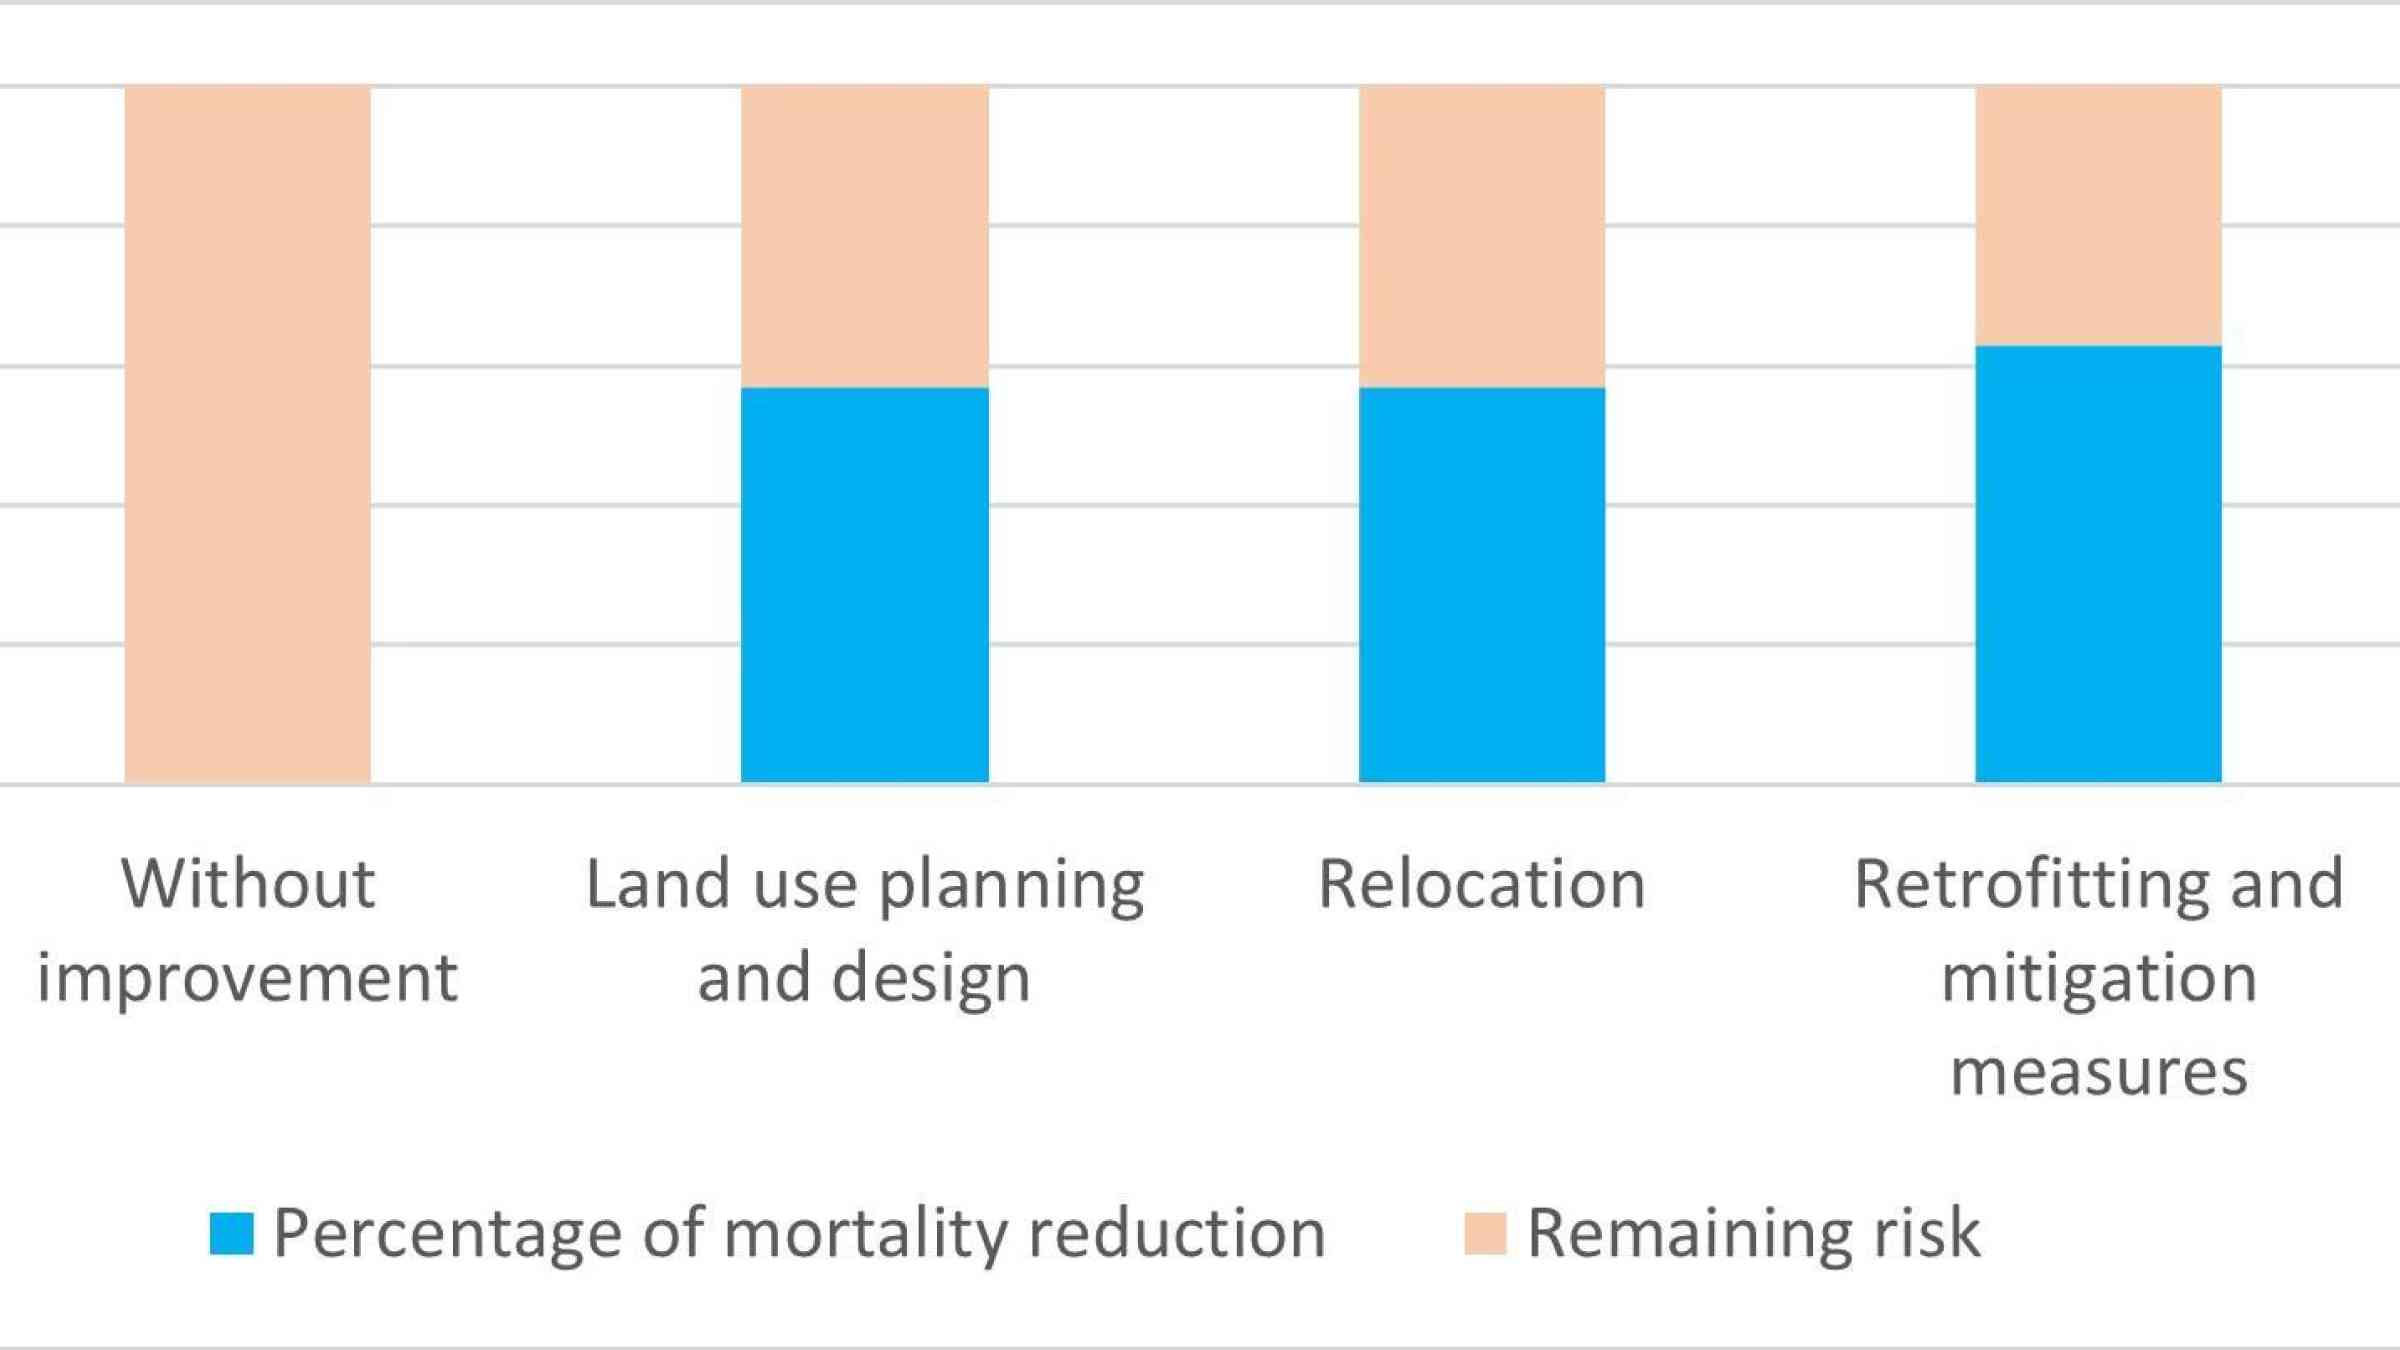 Reducing mortalities (per cent) and seismic risk: key interventions 